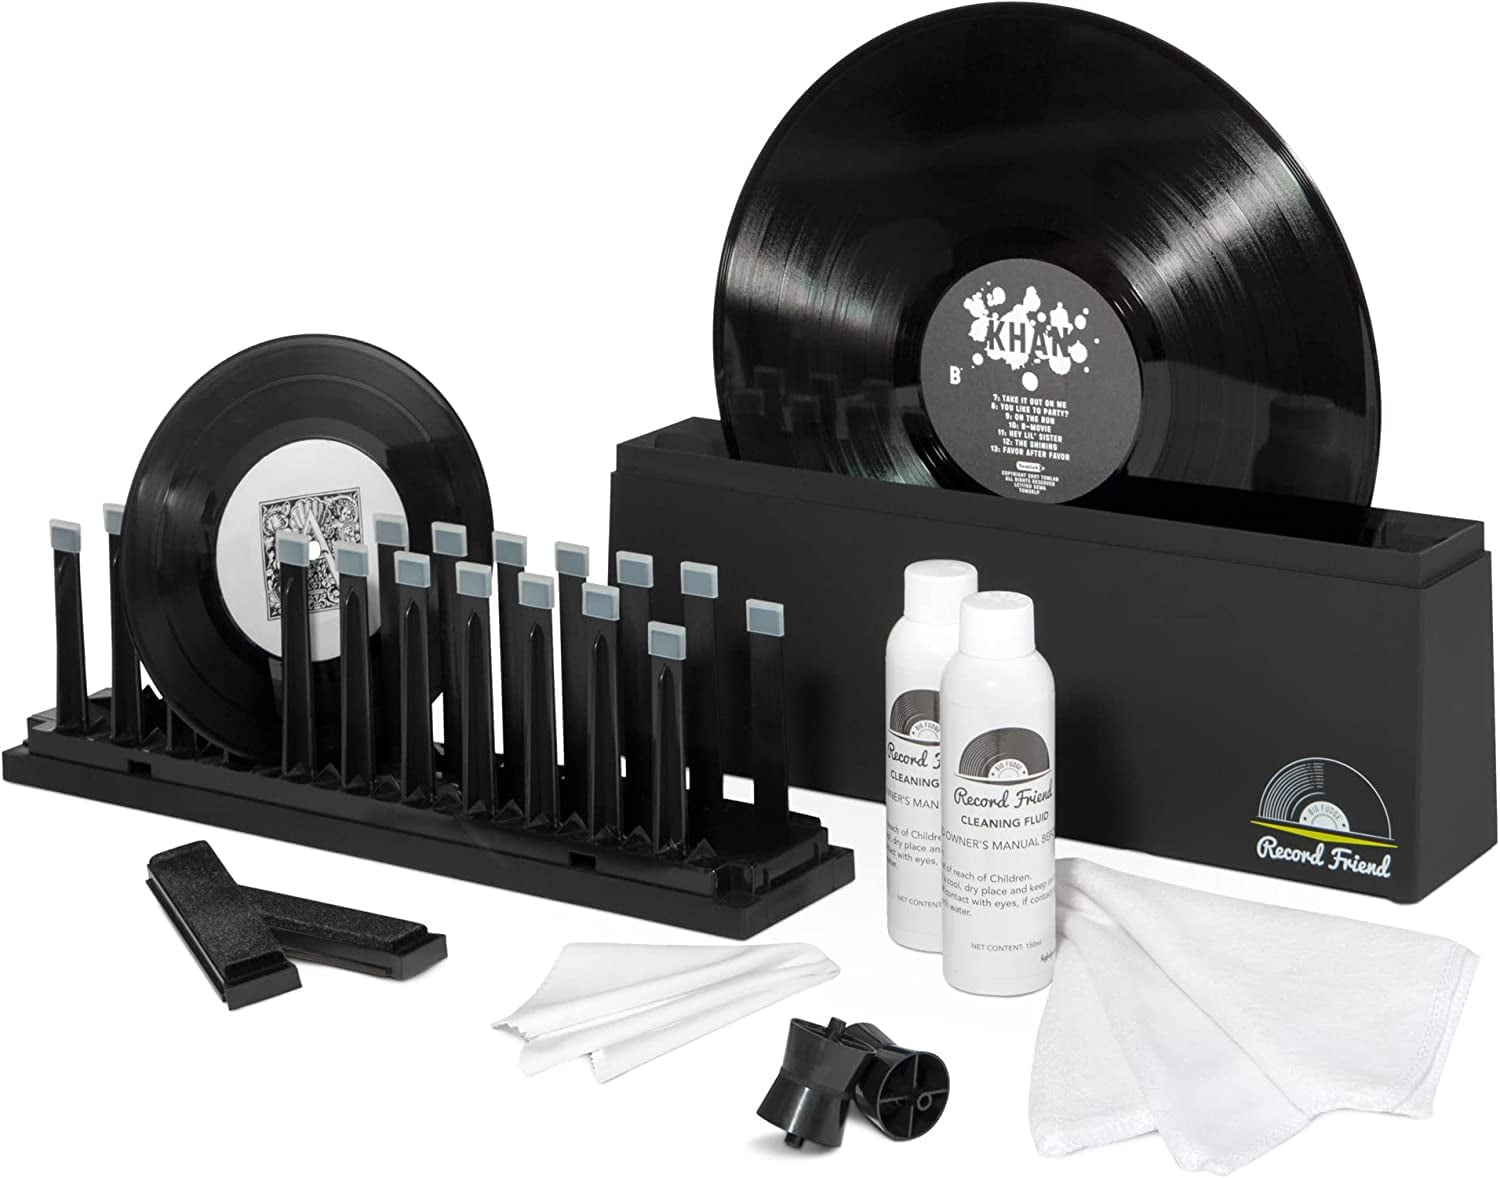 Big Fudge Vinyl Record Cleaning Kit for Vinyl Records - Includes